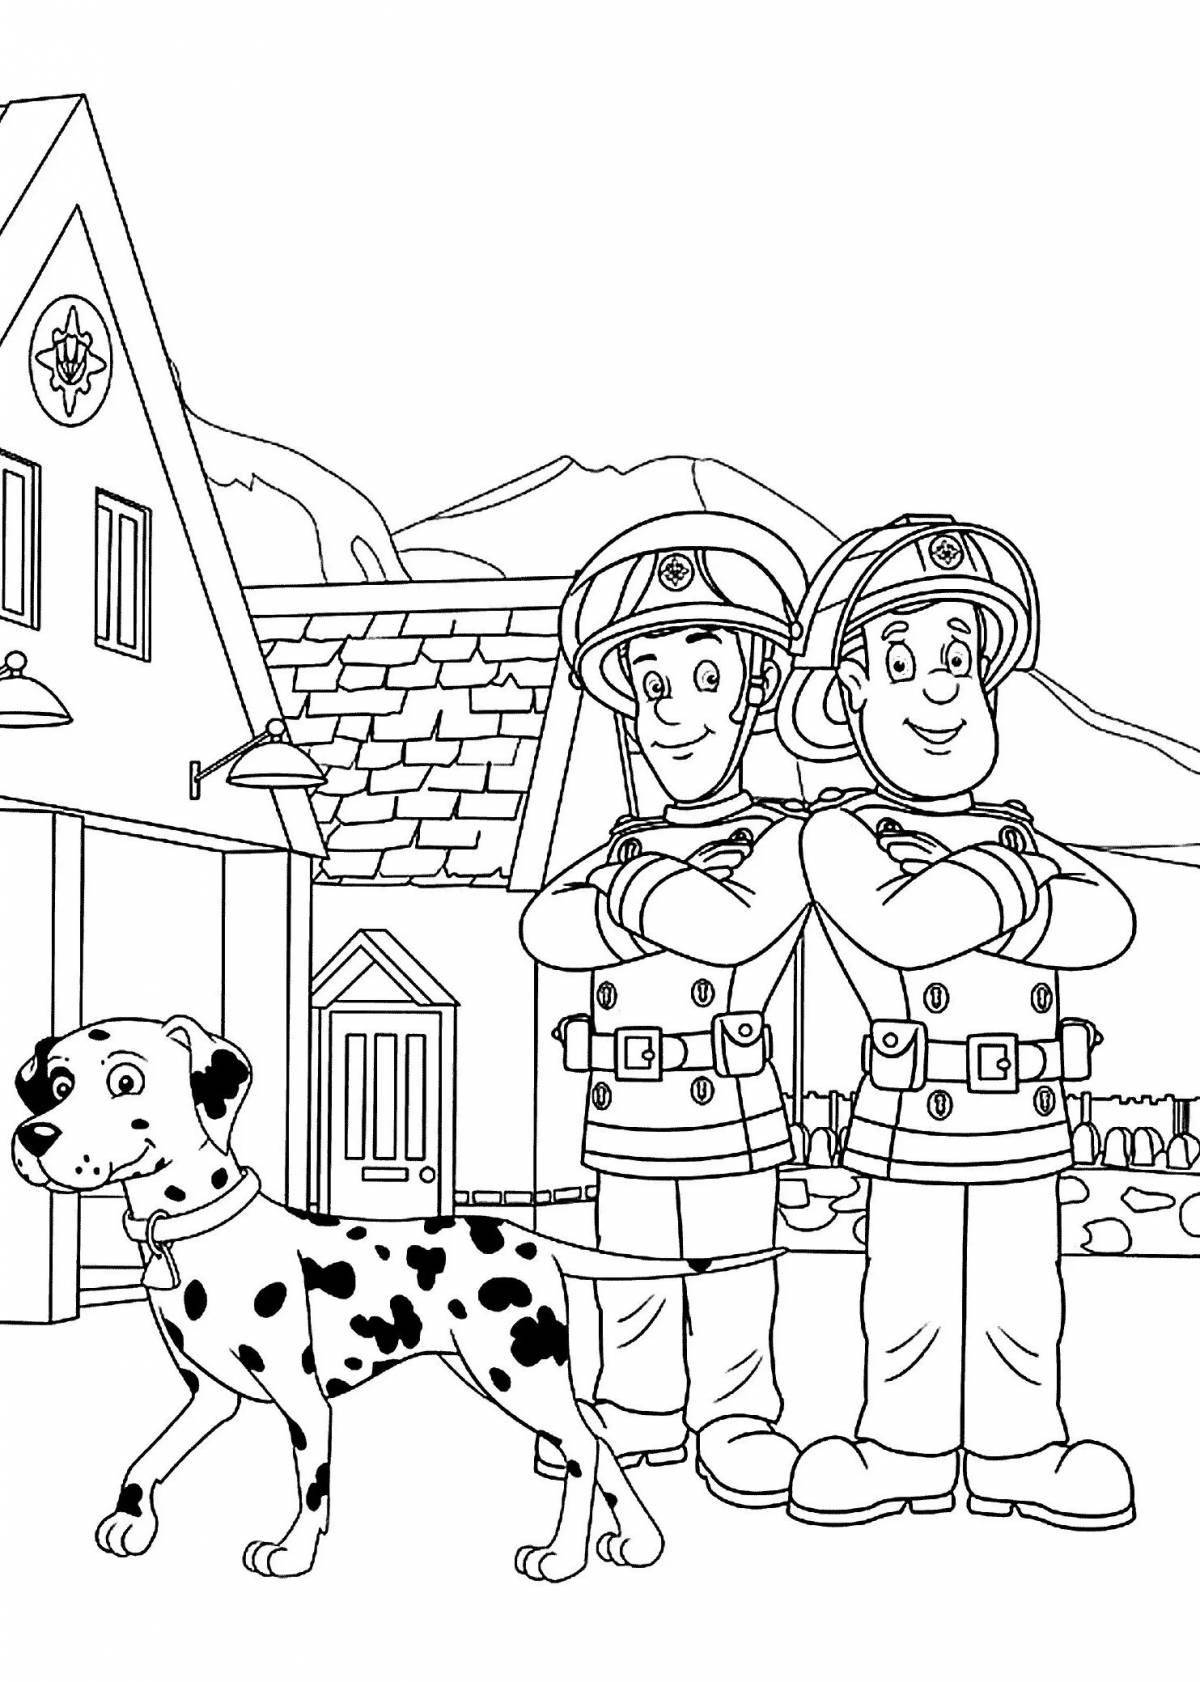 Fairy fireman sam coloring book for kids